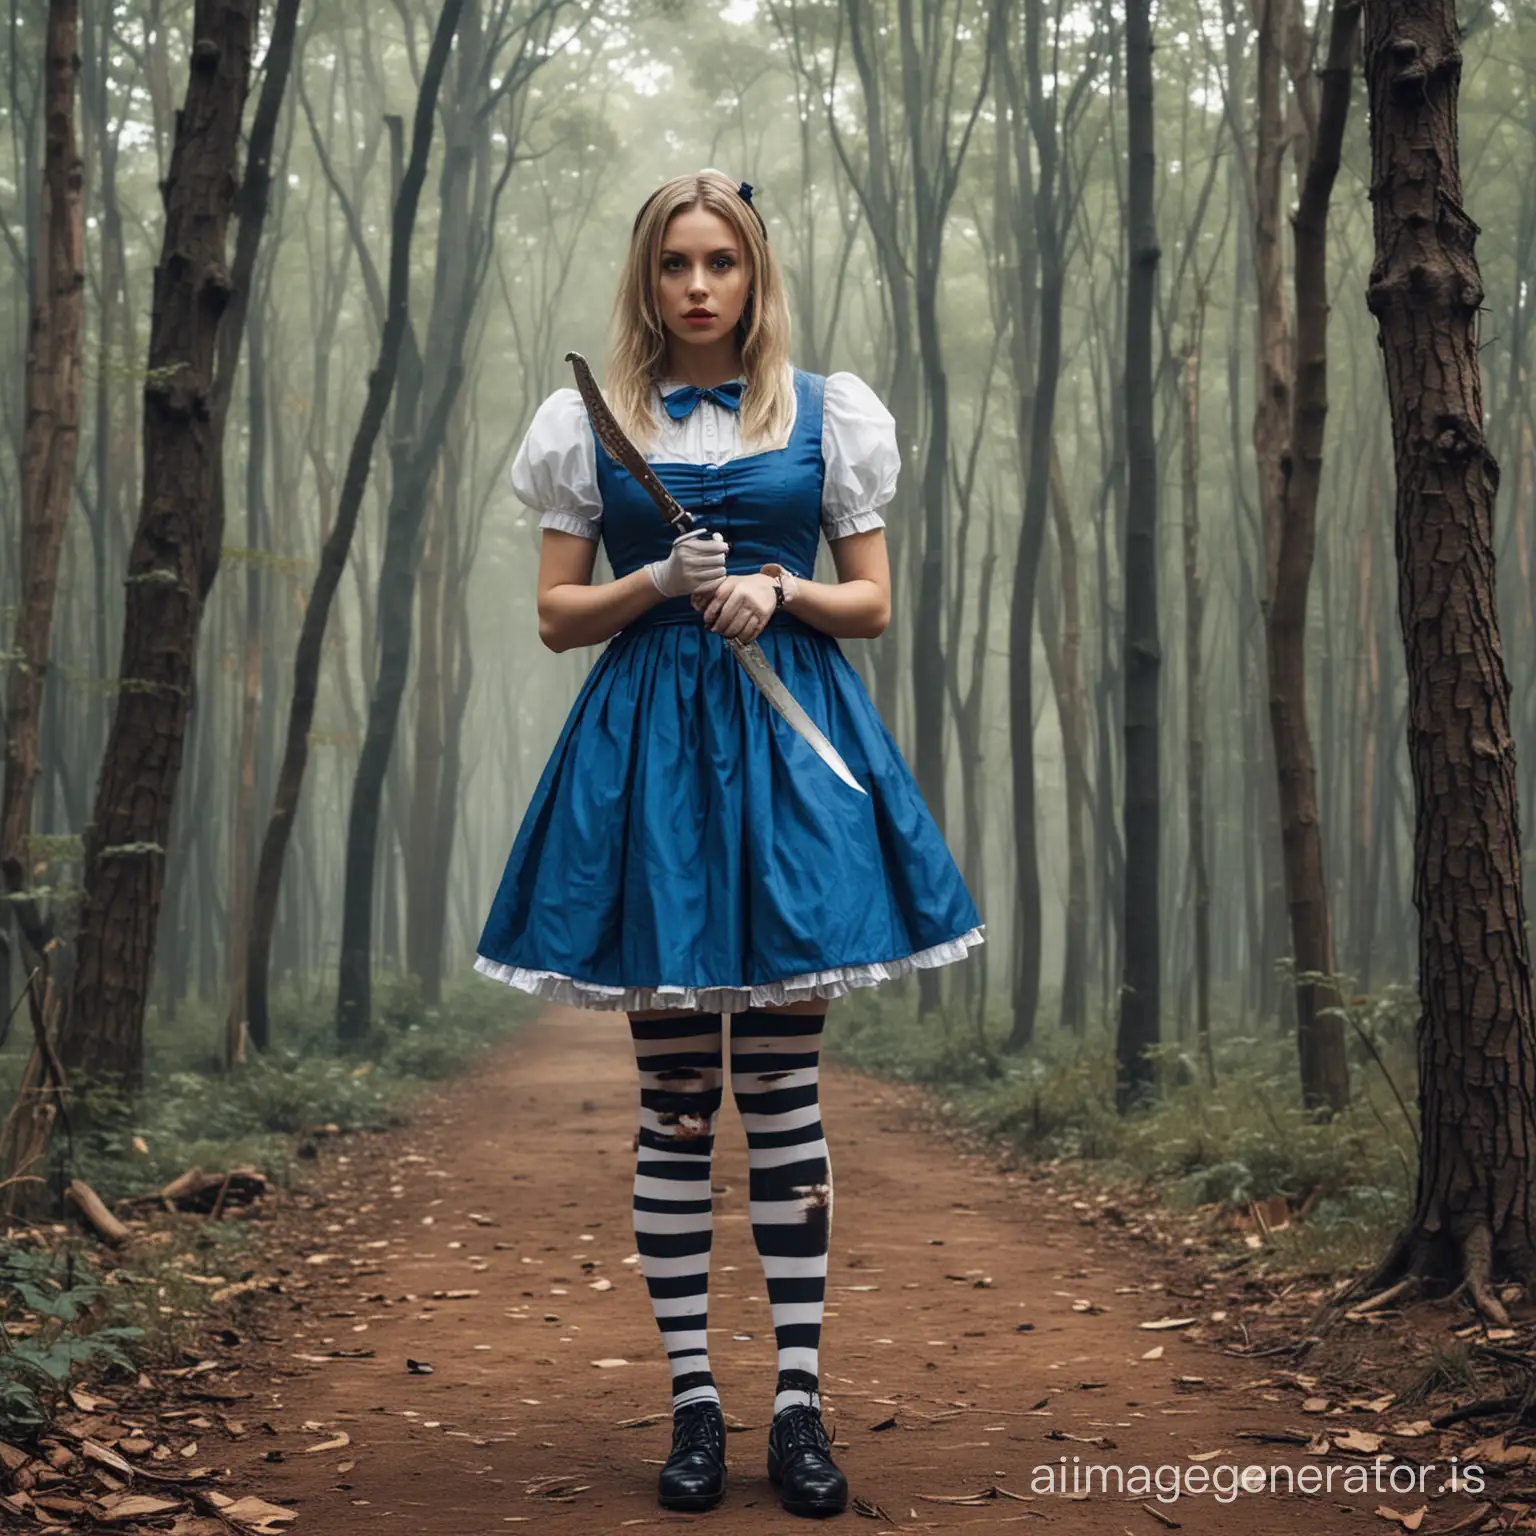 Madness-Returns-Tanned-Alice-in-Wonderland-with-Striped-Stockings-and-Knife-in-Bright-Forest